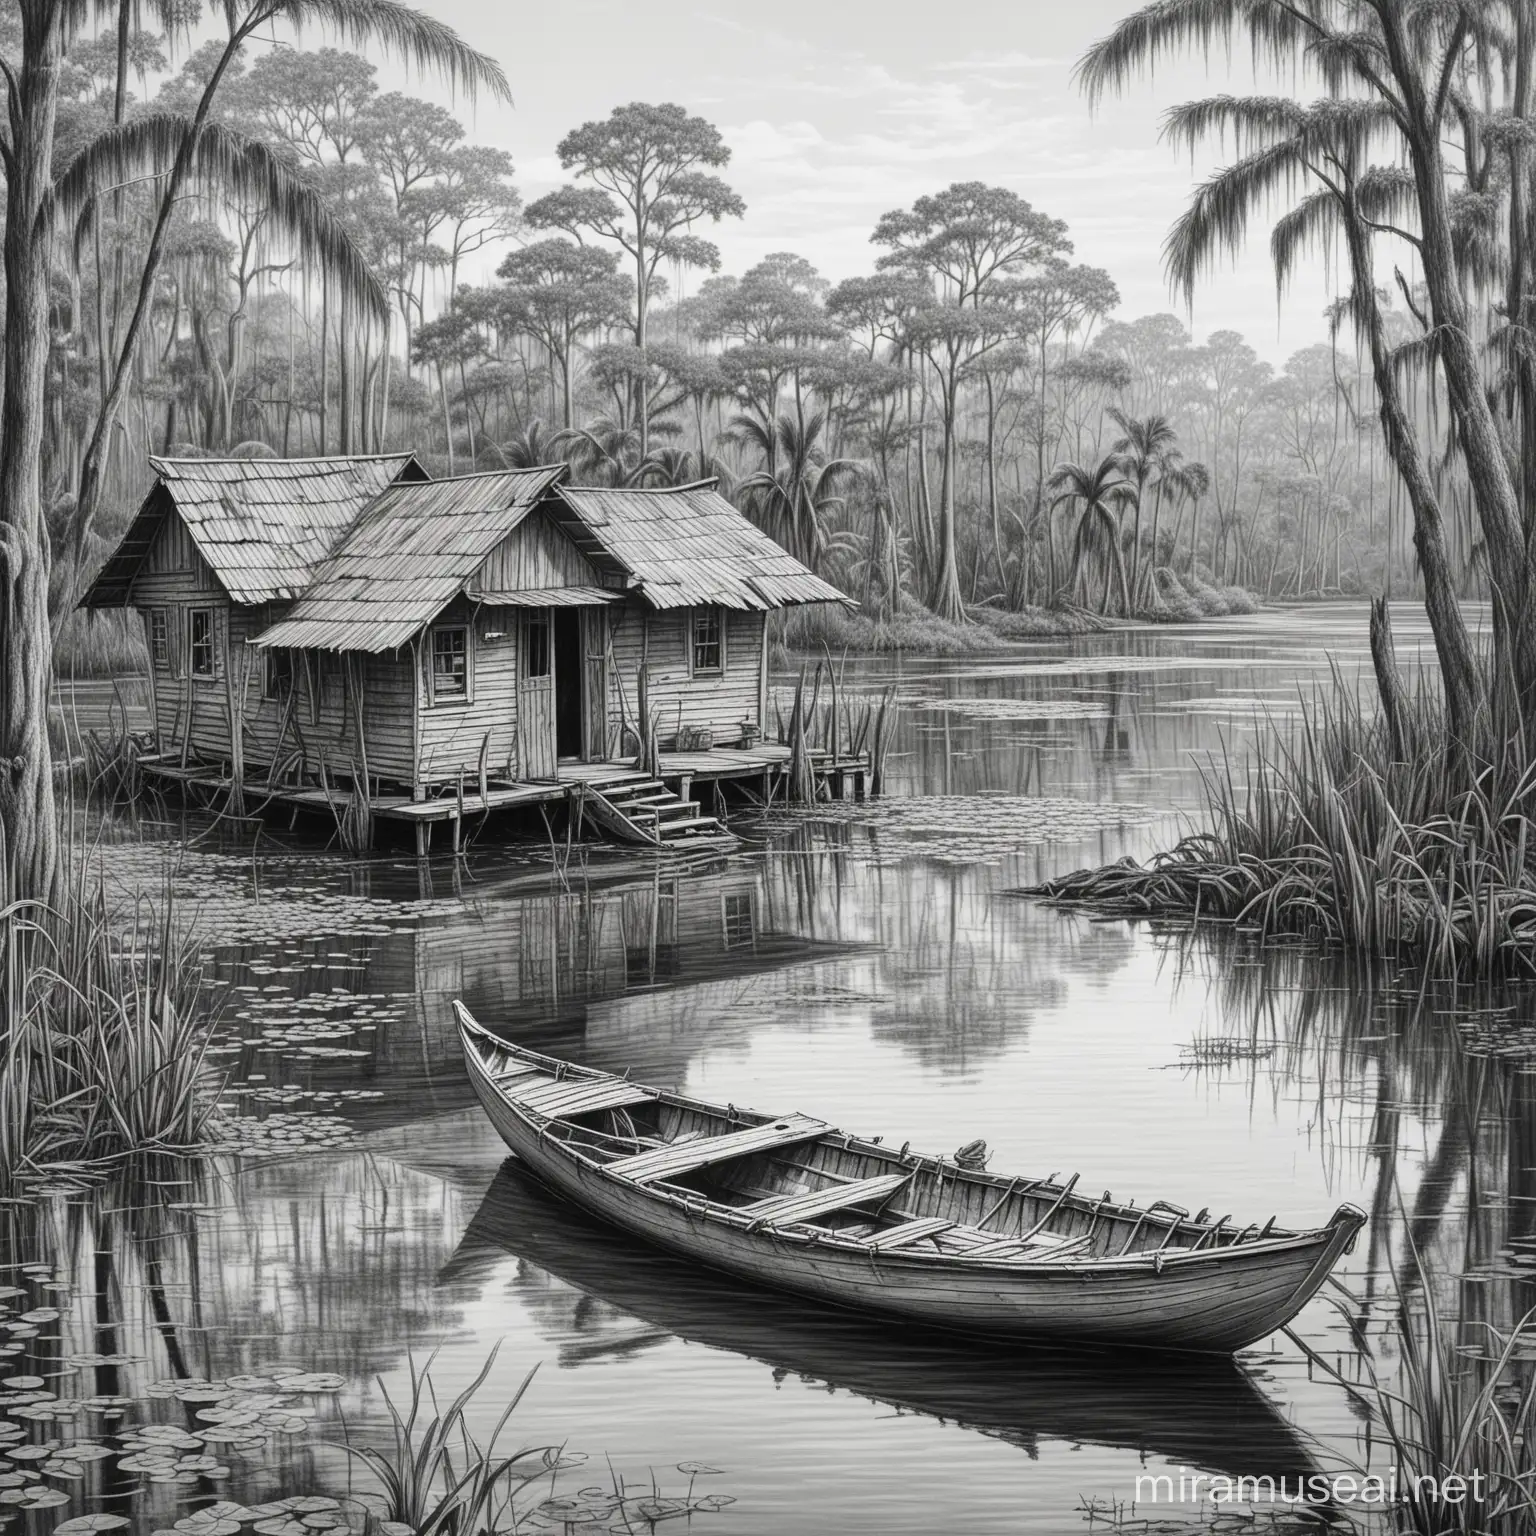 black and white line drawing of the Louisiana swamp with a pirogue, an alligator in the foreground, and an old cajun style shack in the background
